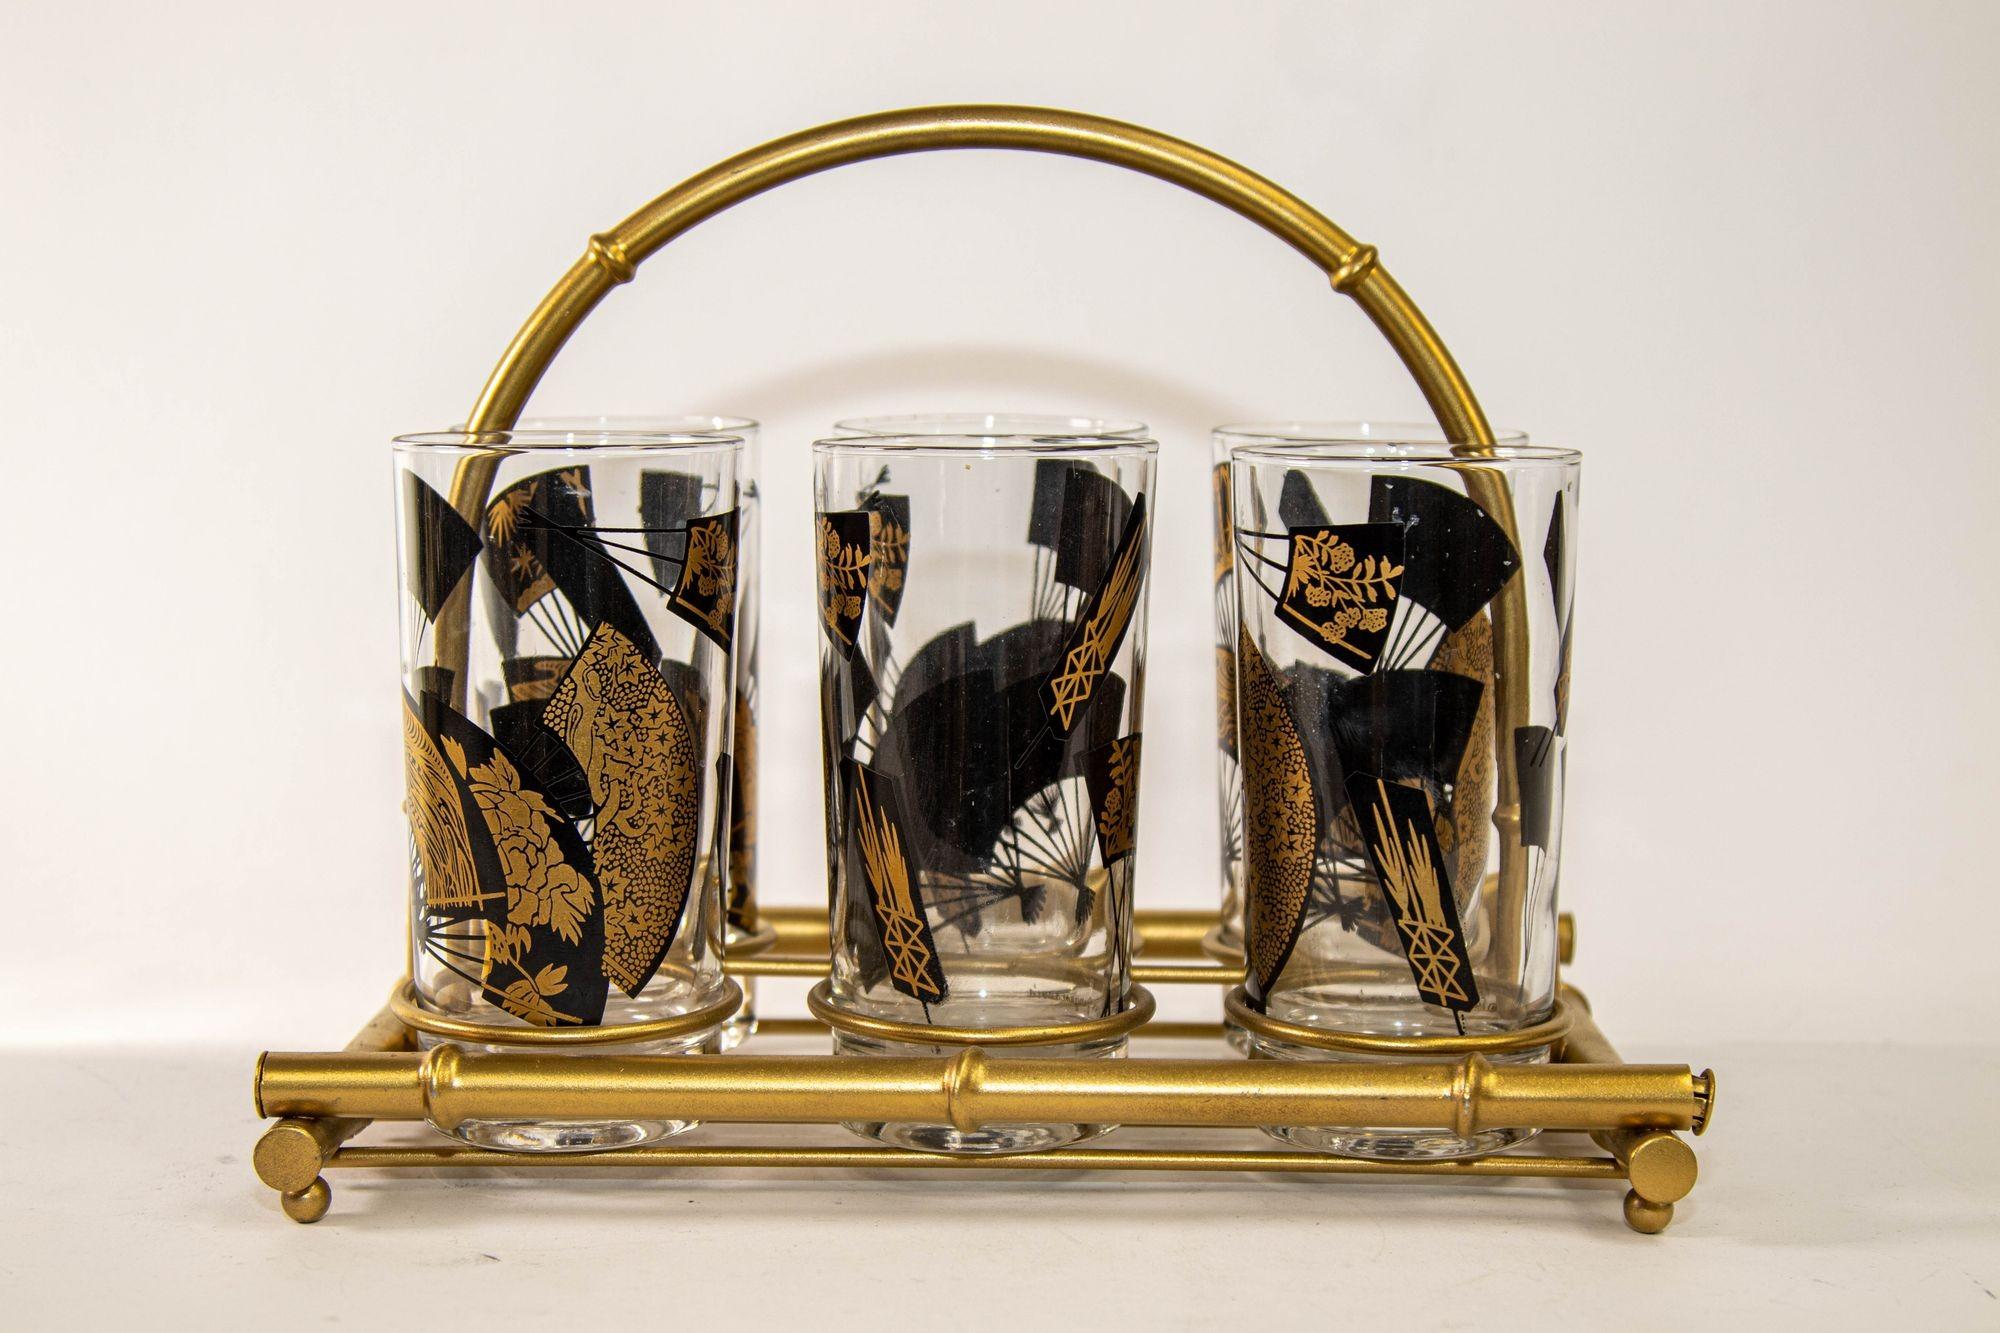 1970s Set of Six Highball Glasses Black and Gold by Jules Jurgensen's in Cart.
Elegant exquisite vintage set of six highball gilt glasses designed by Gurgensen's circa 1976 with gold cart in faux bamboo design.
Collectible rare Mid Century barware,